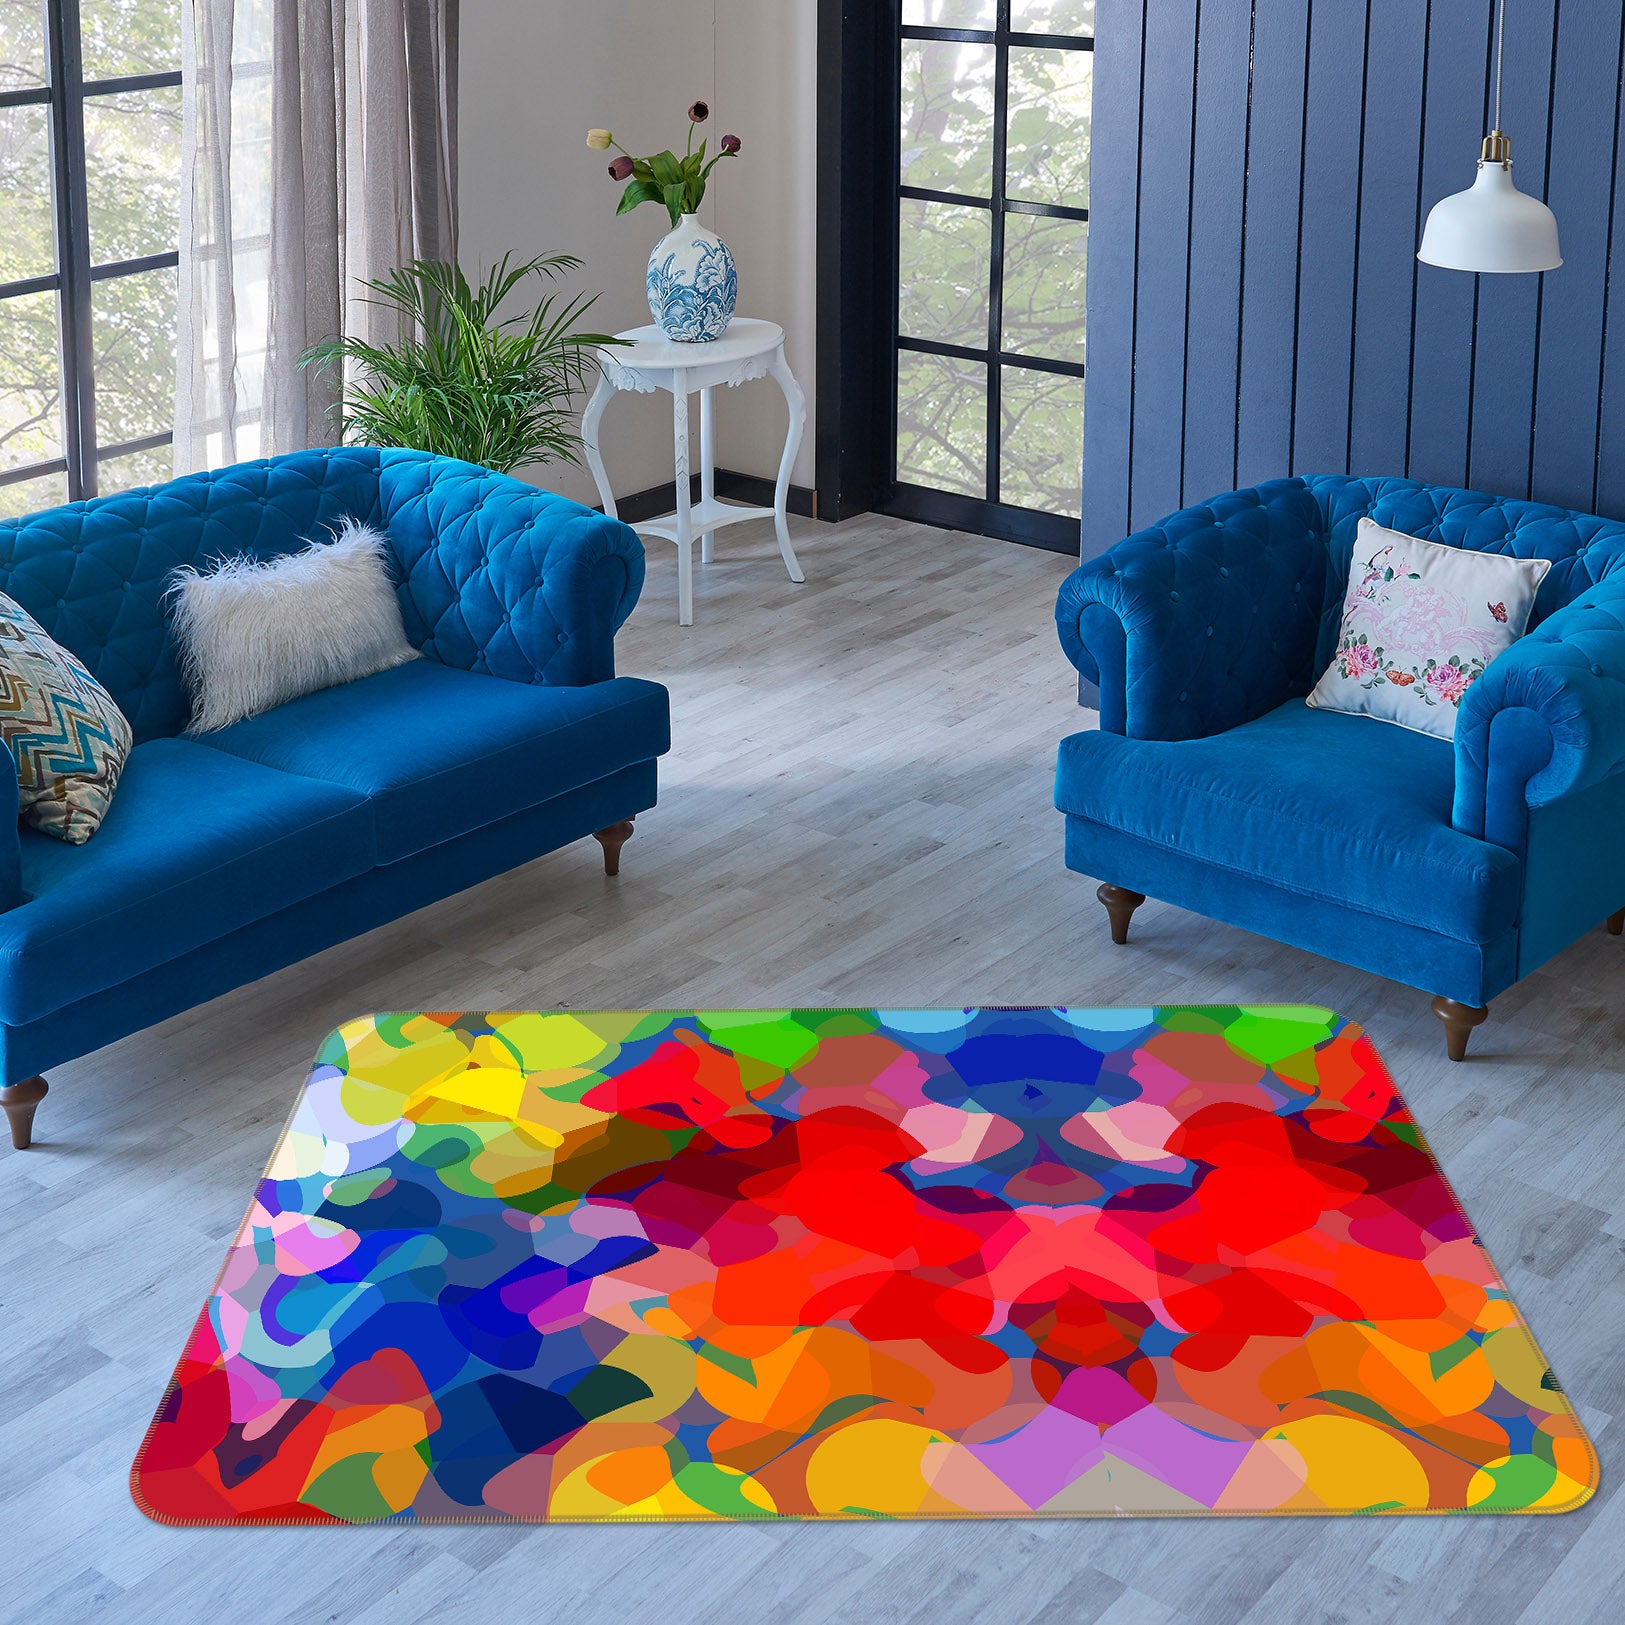 3D Colorful Pattern 1009 Shandra Smith Rug Non Slip Rug Mat